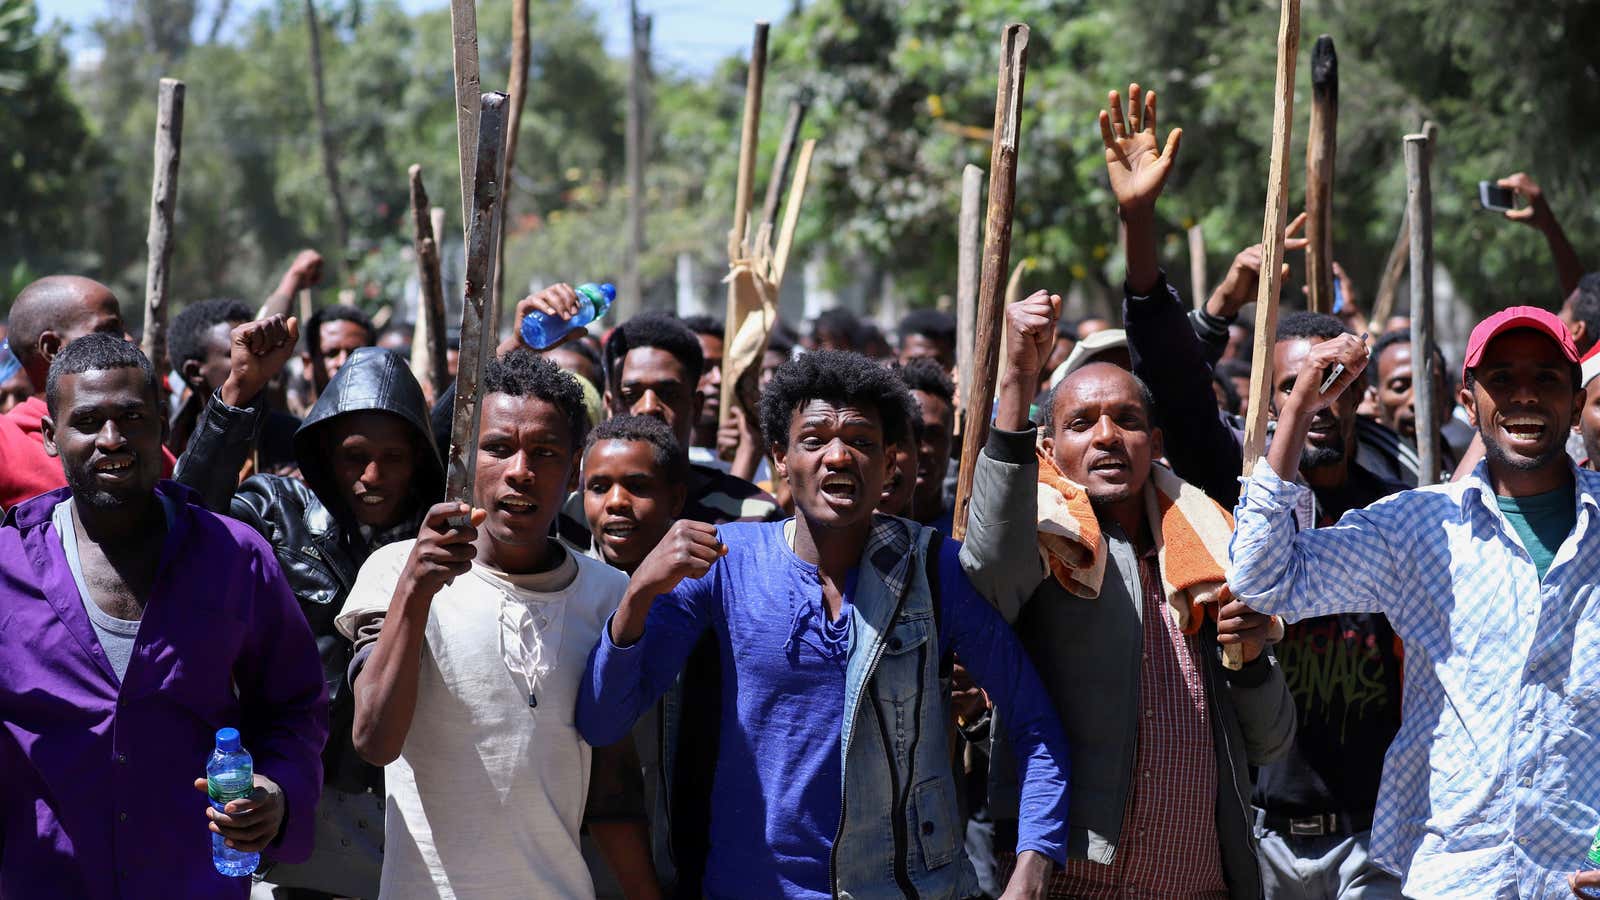 Oromo youth chant slogans during a protest in-front of Jawar Mohammed’s house, an Oromo activist and leader of the Oromo protest in Addis Ababa, Ethiopia, October 24, 2019.